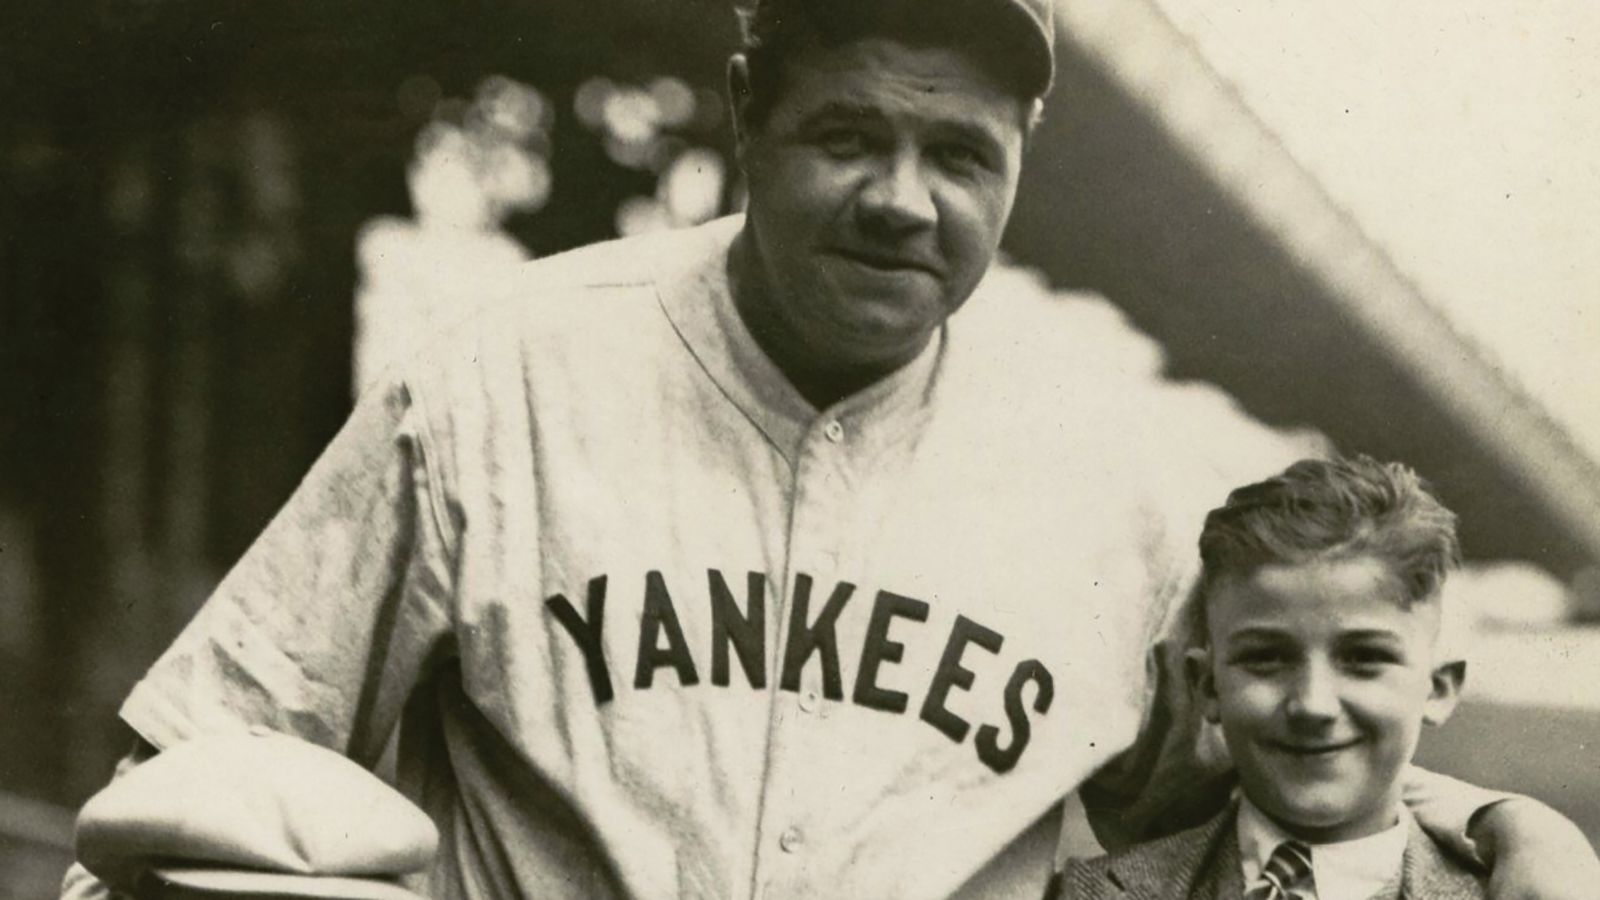 Babe Ruth Yankees jersey becomes most expensive piece of sports memorabilia  sold at auction - 6abc Philadelphia